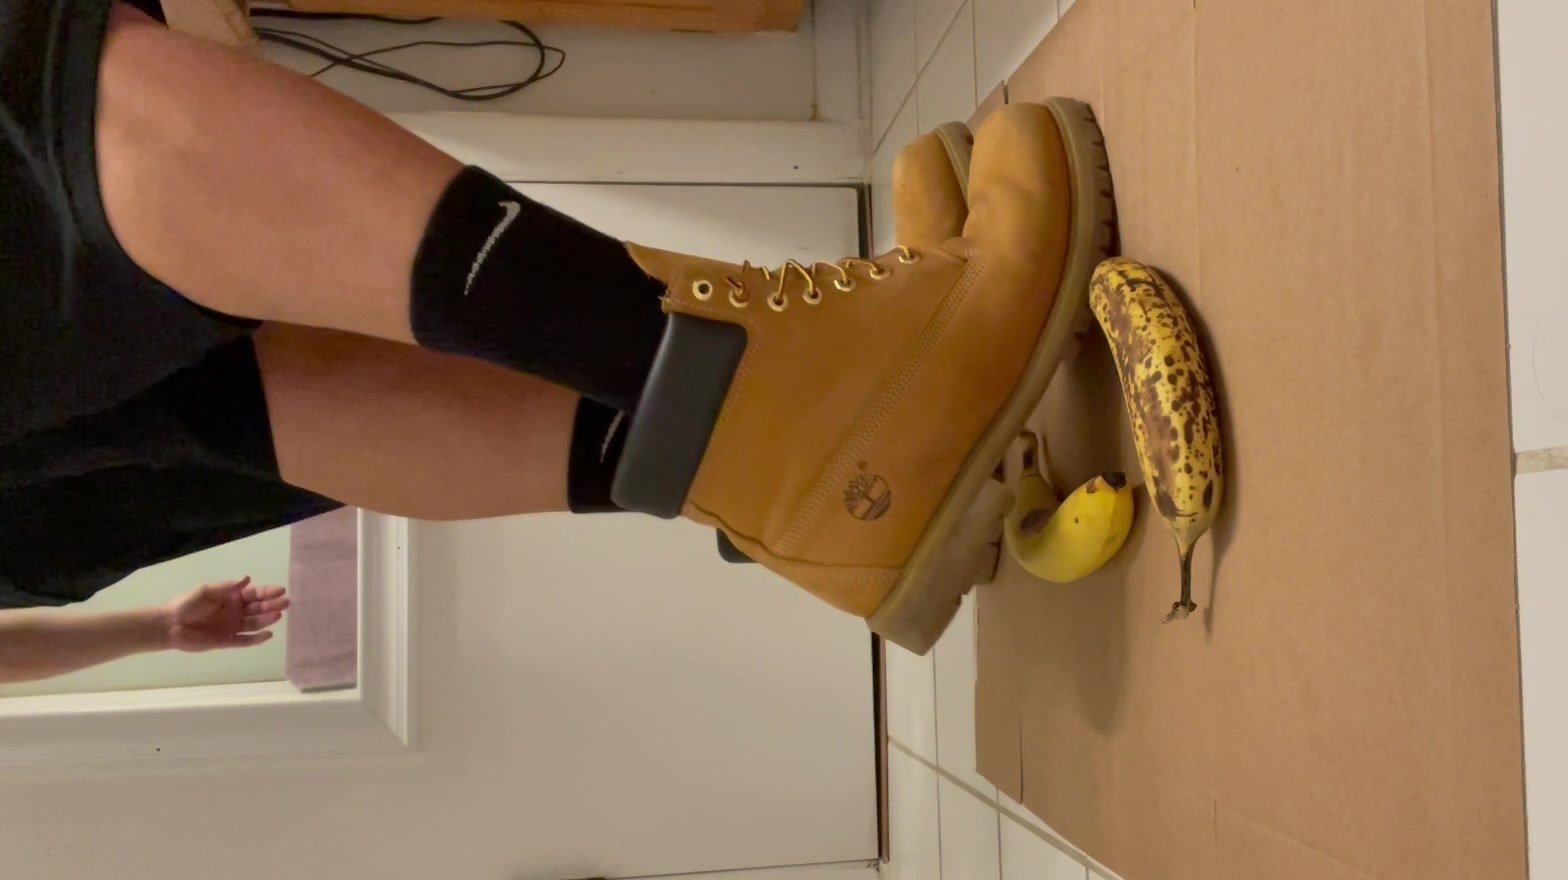 Smashing bananas under my size 13 Timberlands and Air Force Ones